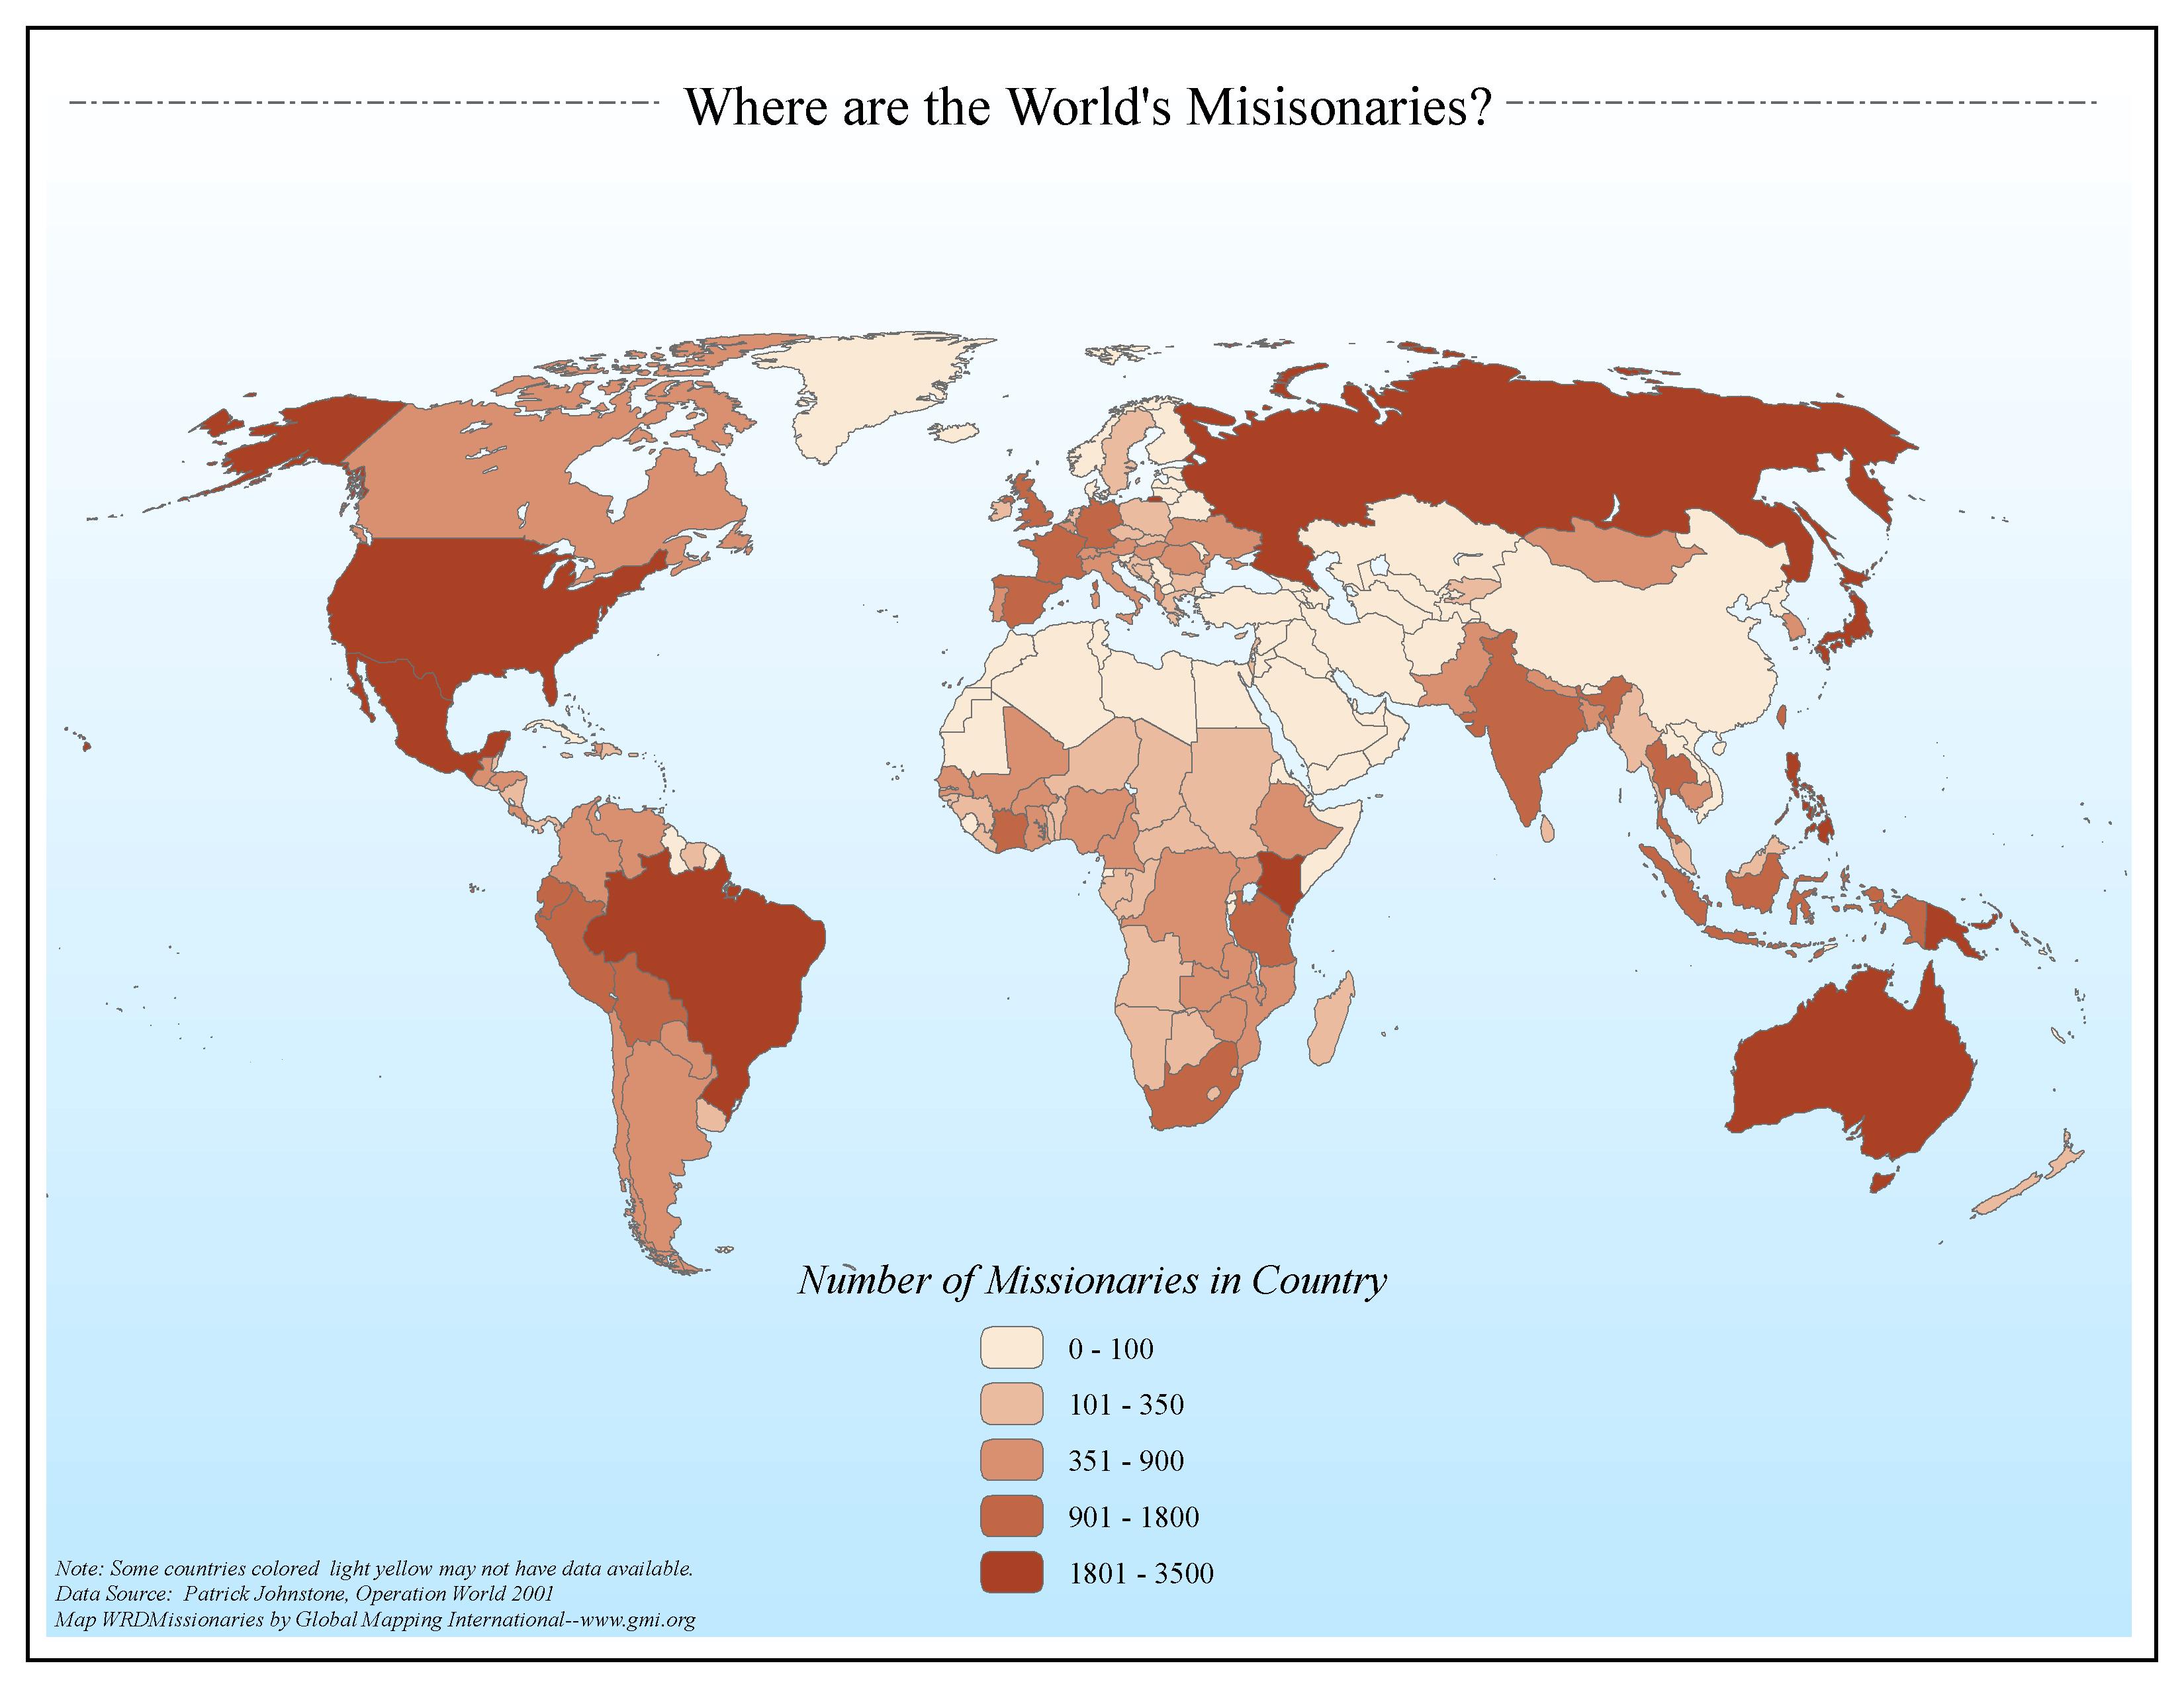 Where are the World's Misisonaries?